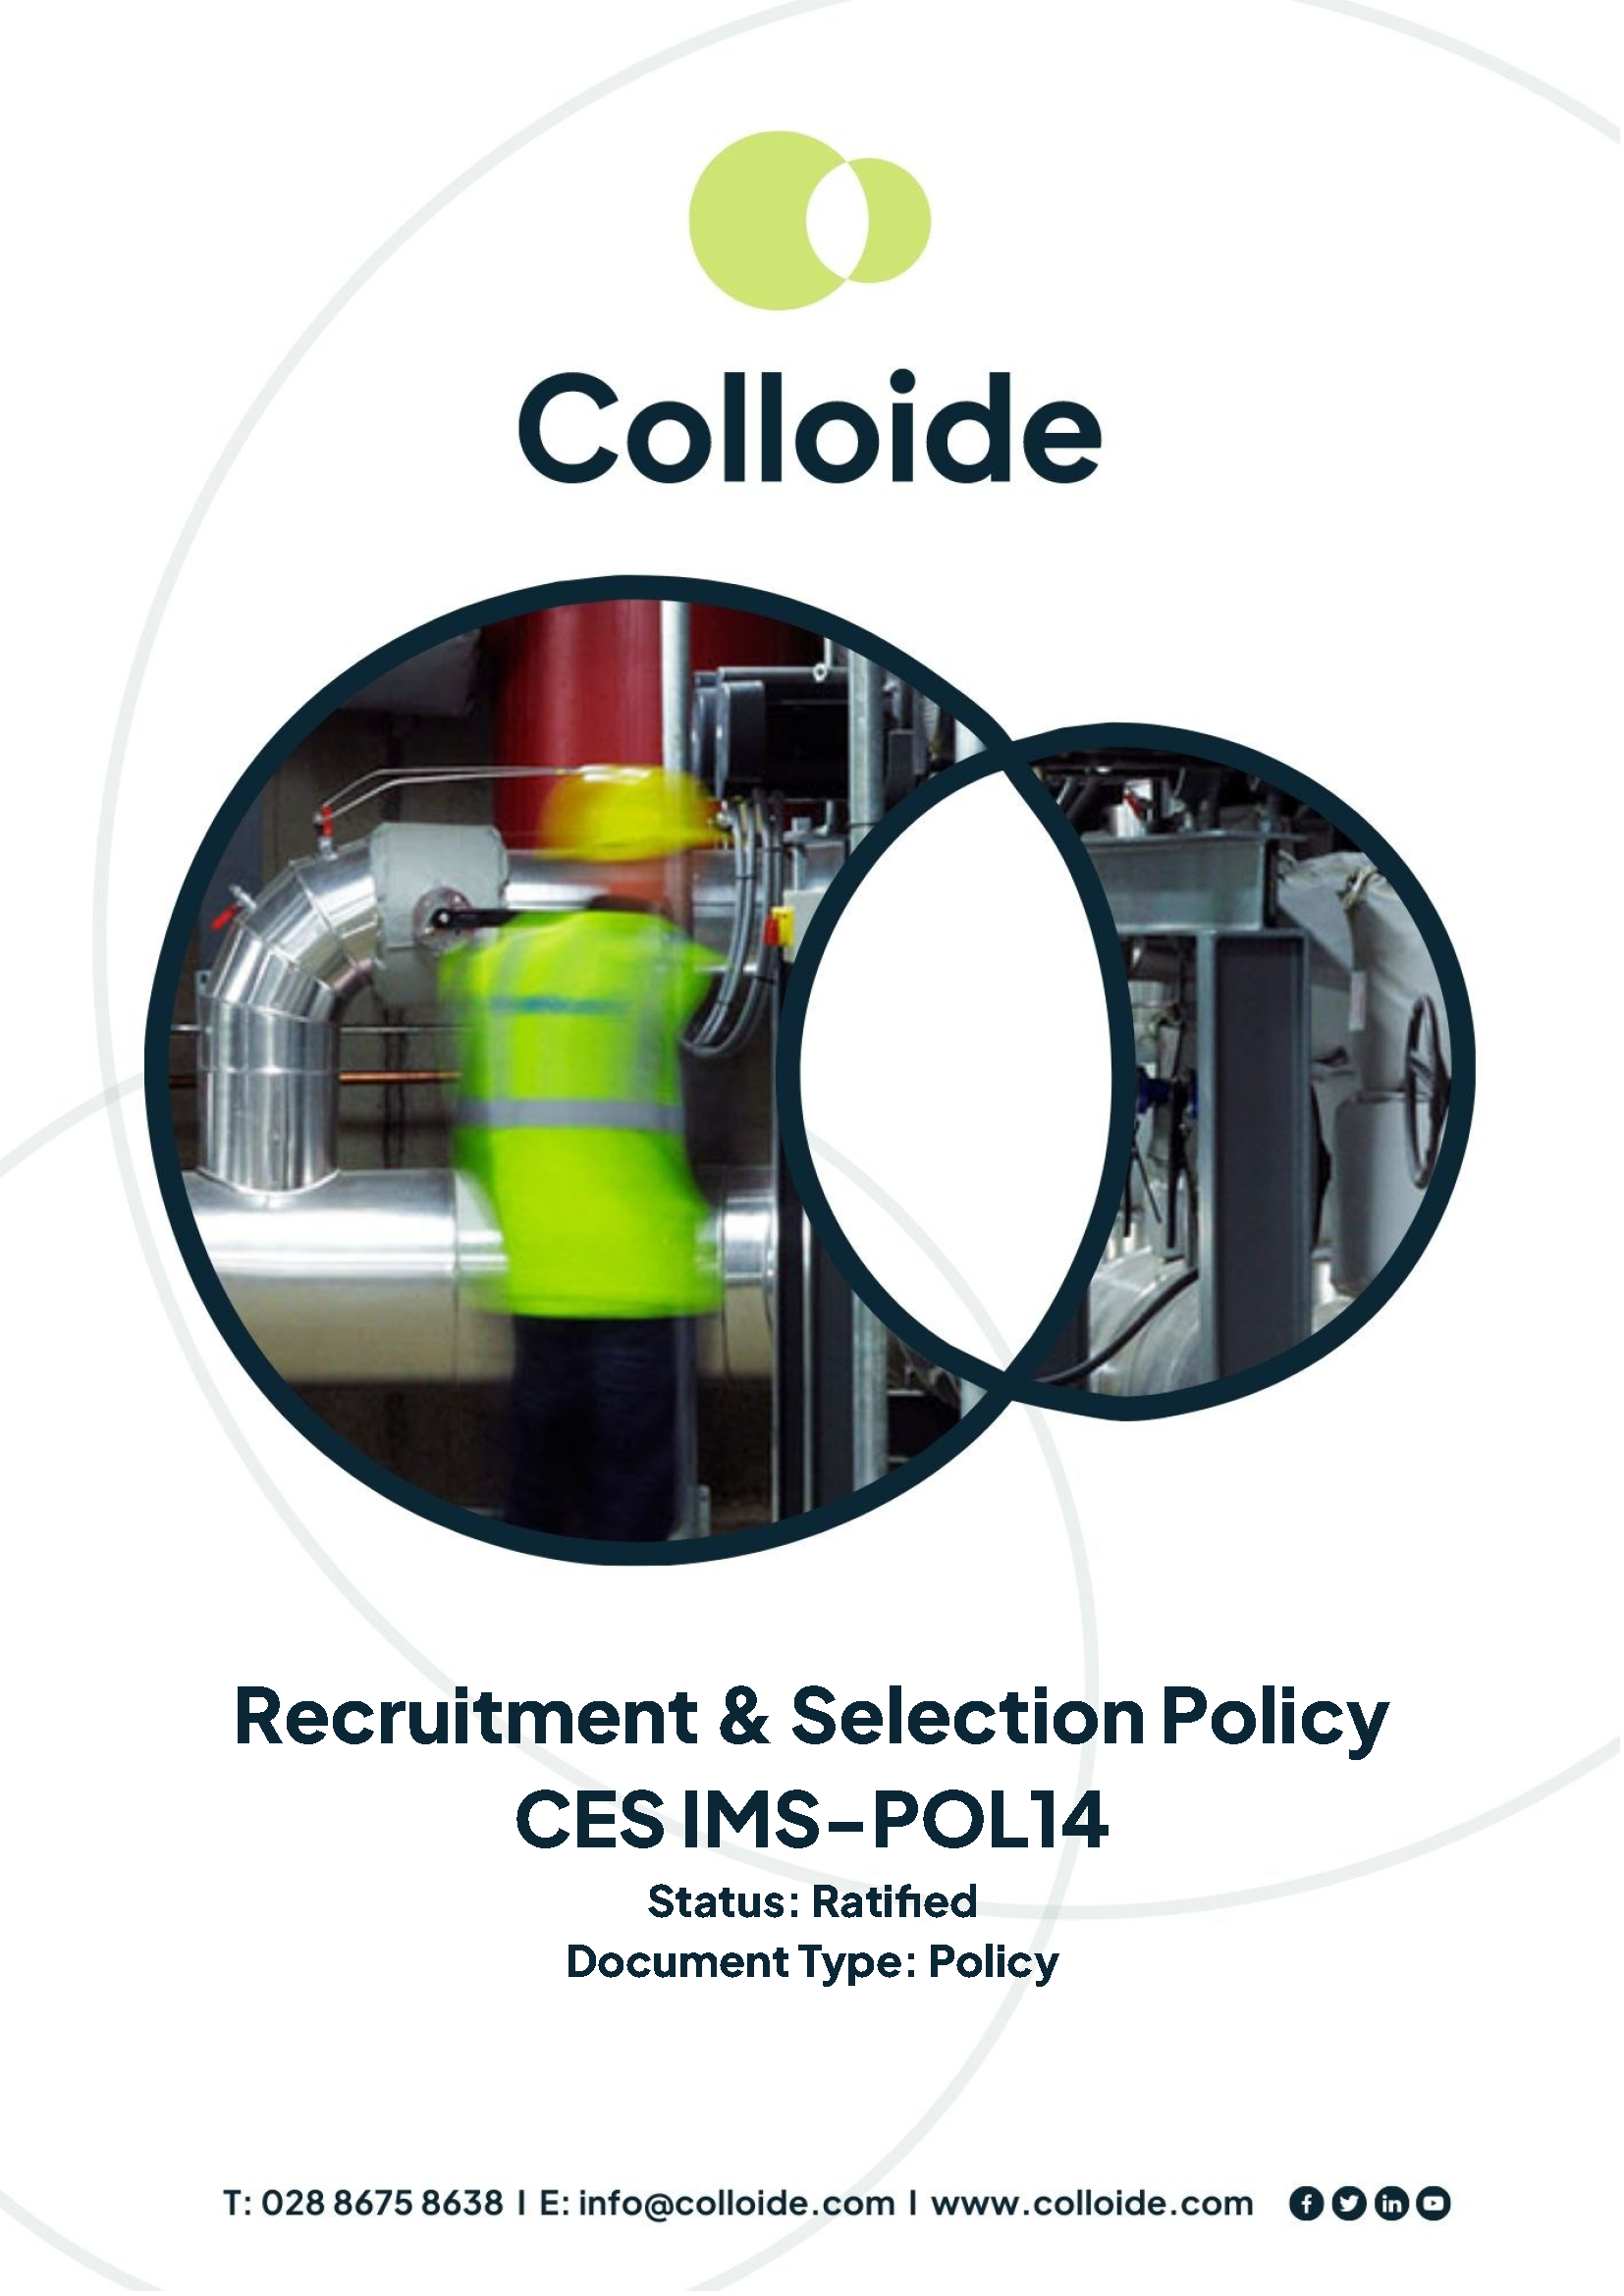 Cover Image for CES IMS-POL14 – Recruitment & Selection Policy